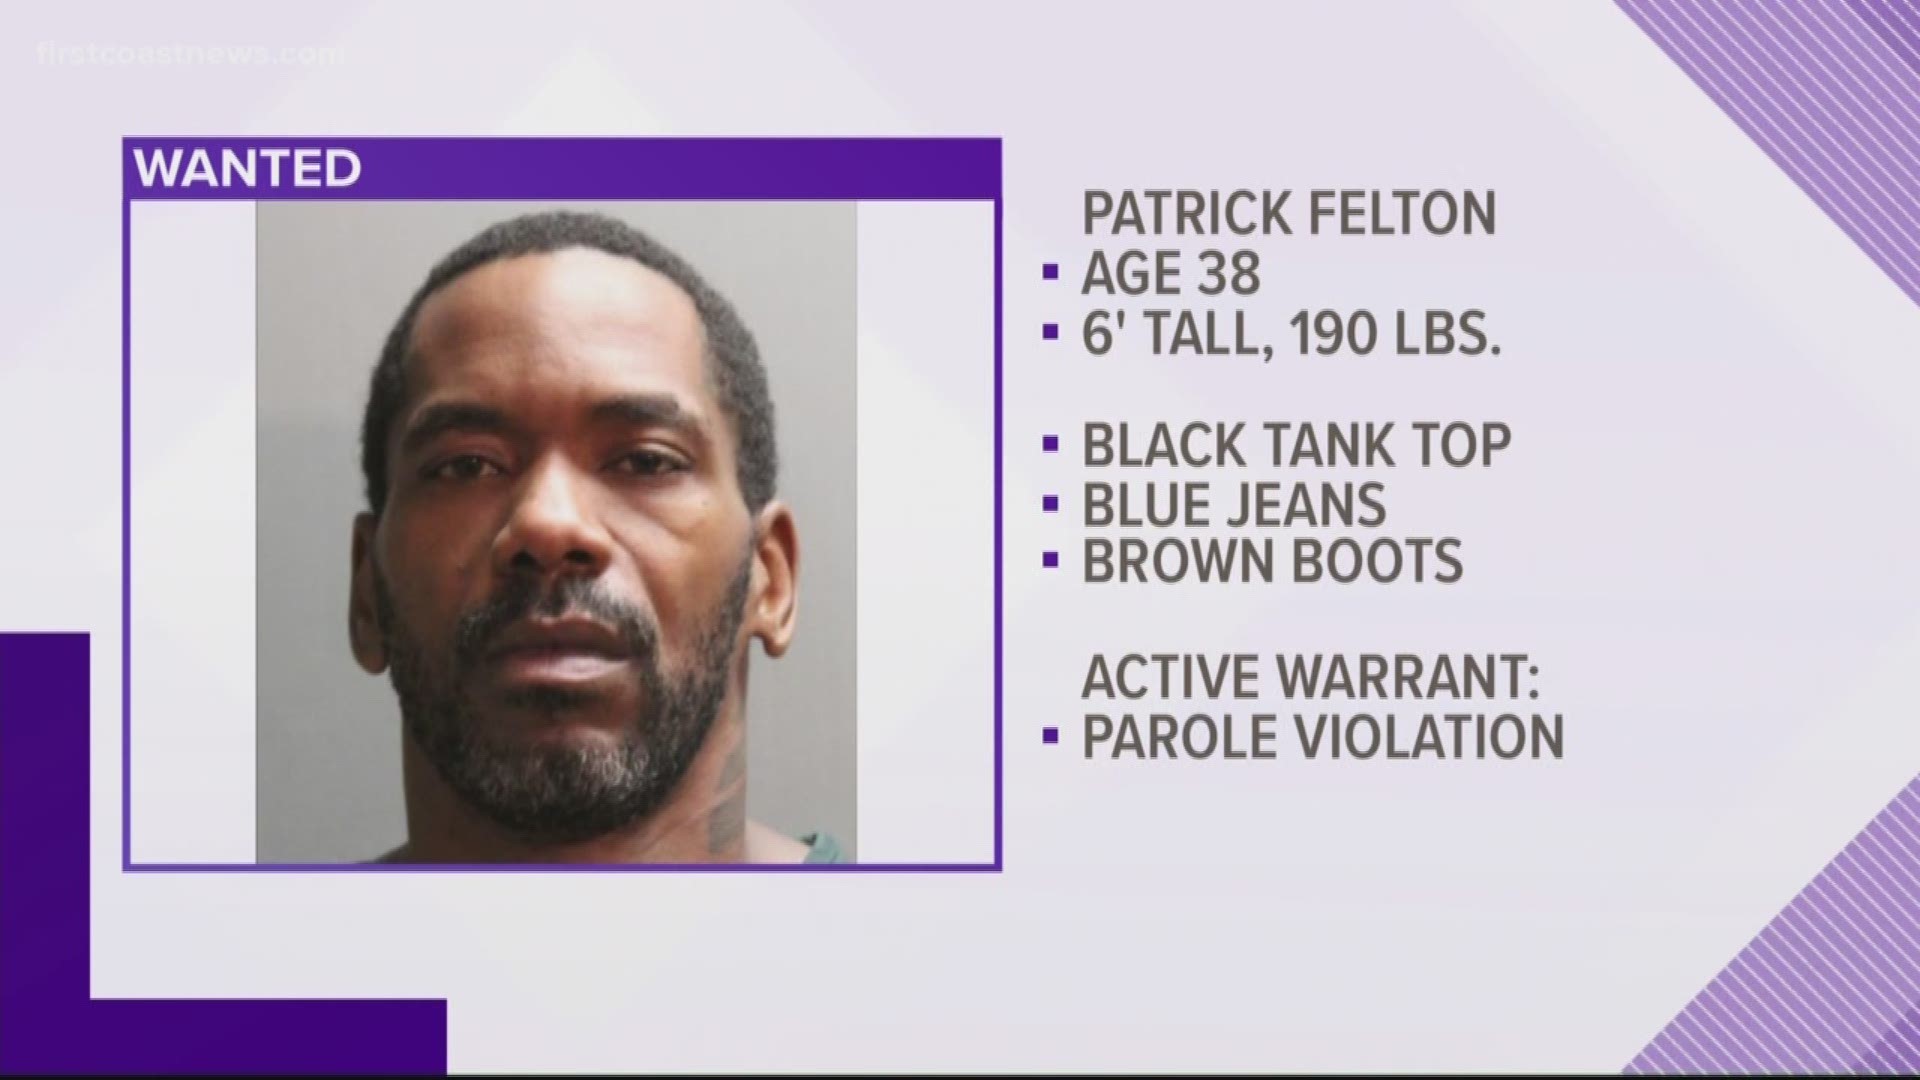 Police said they safely located the 13-year-old boy but the alleged suspect, Patrick Felton, 38, is still unaccounted for.